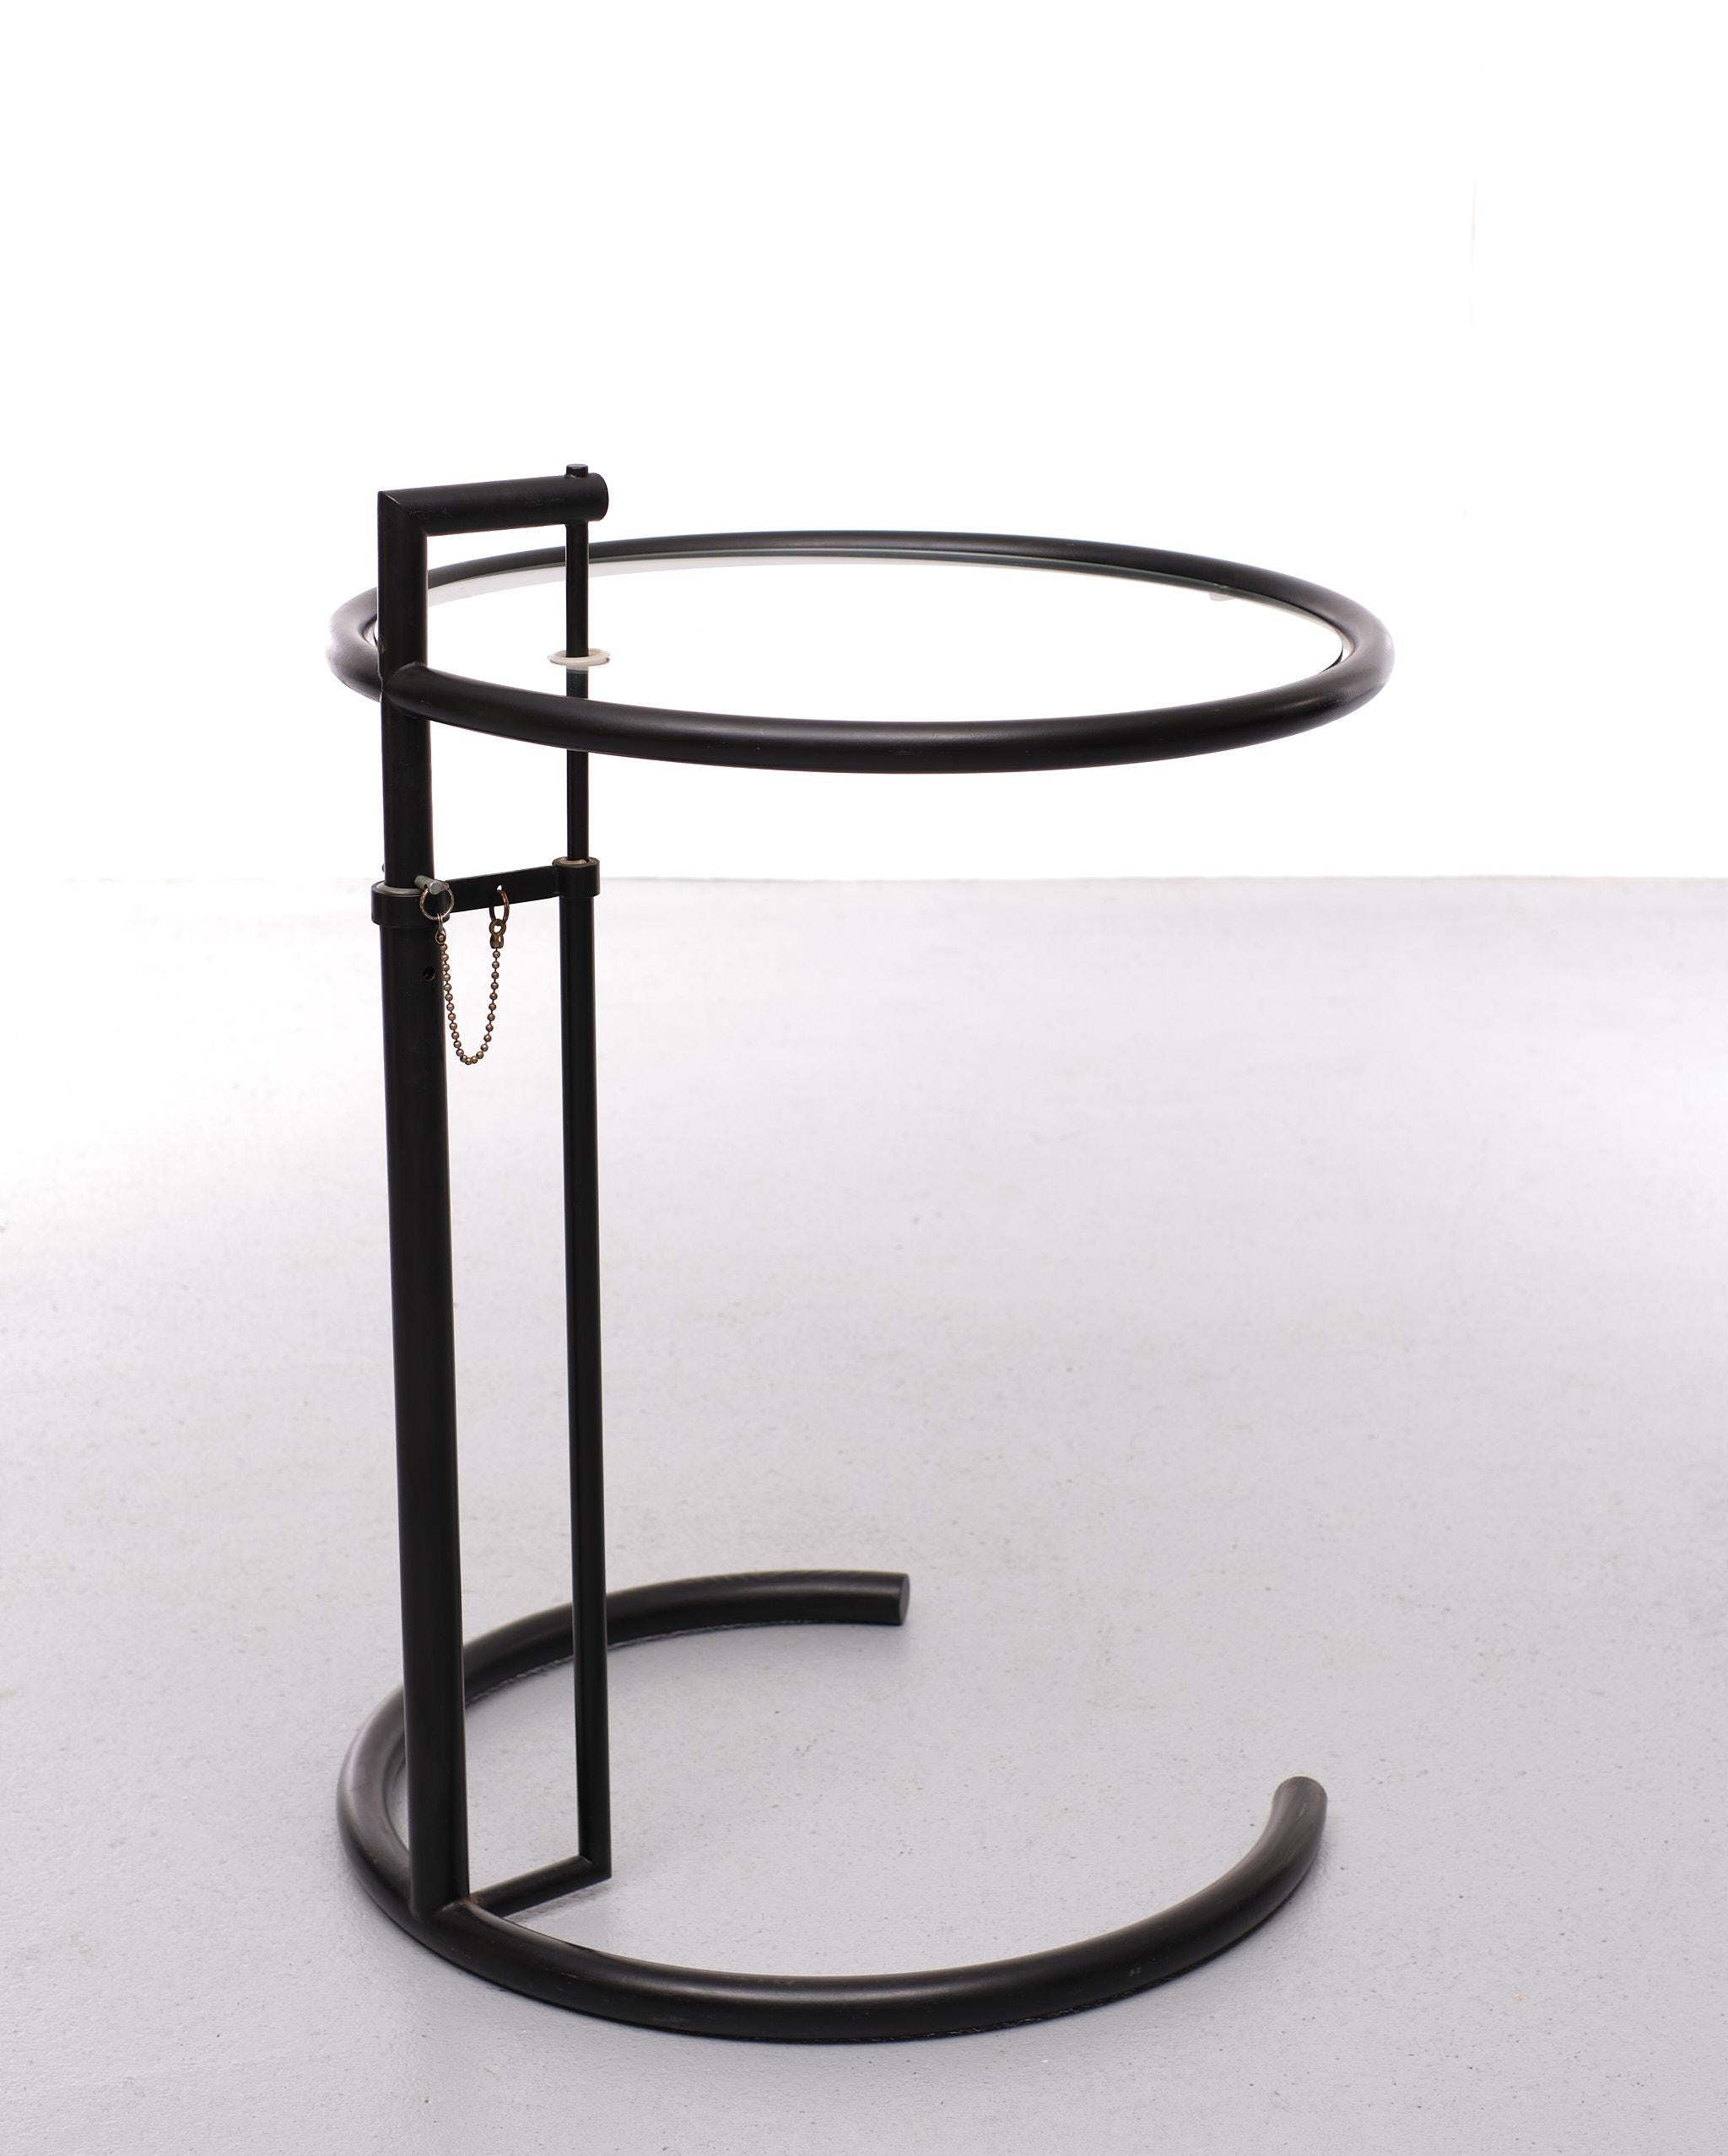 Eileen gray side table after a design of Eileen Gray in 1927. This is a later version of this side table from the eighties. Its adjustable height makes it highly practical; it can be used as a bedside table, a coffee table or as a side table. It has